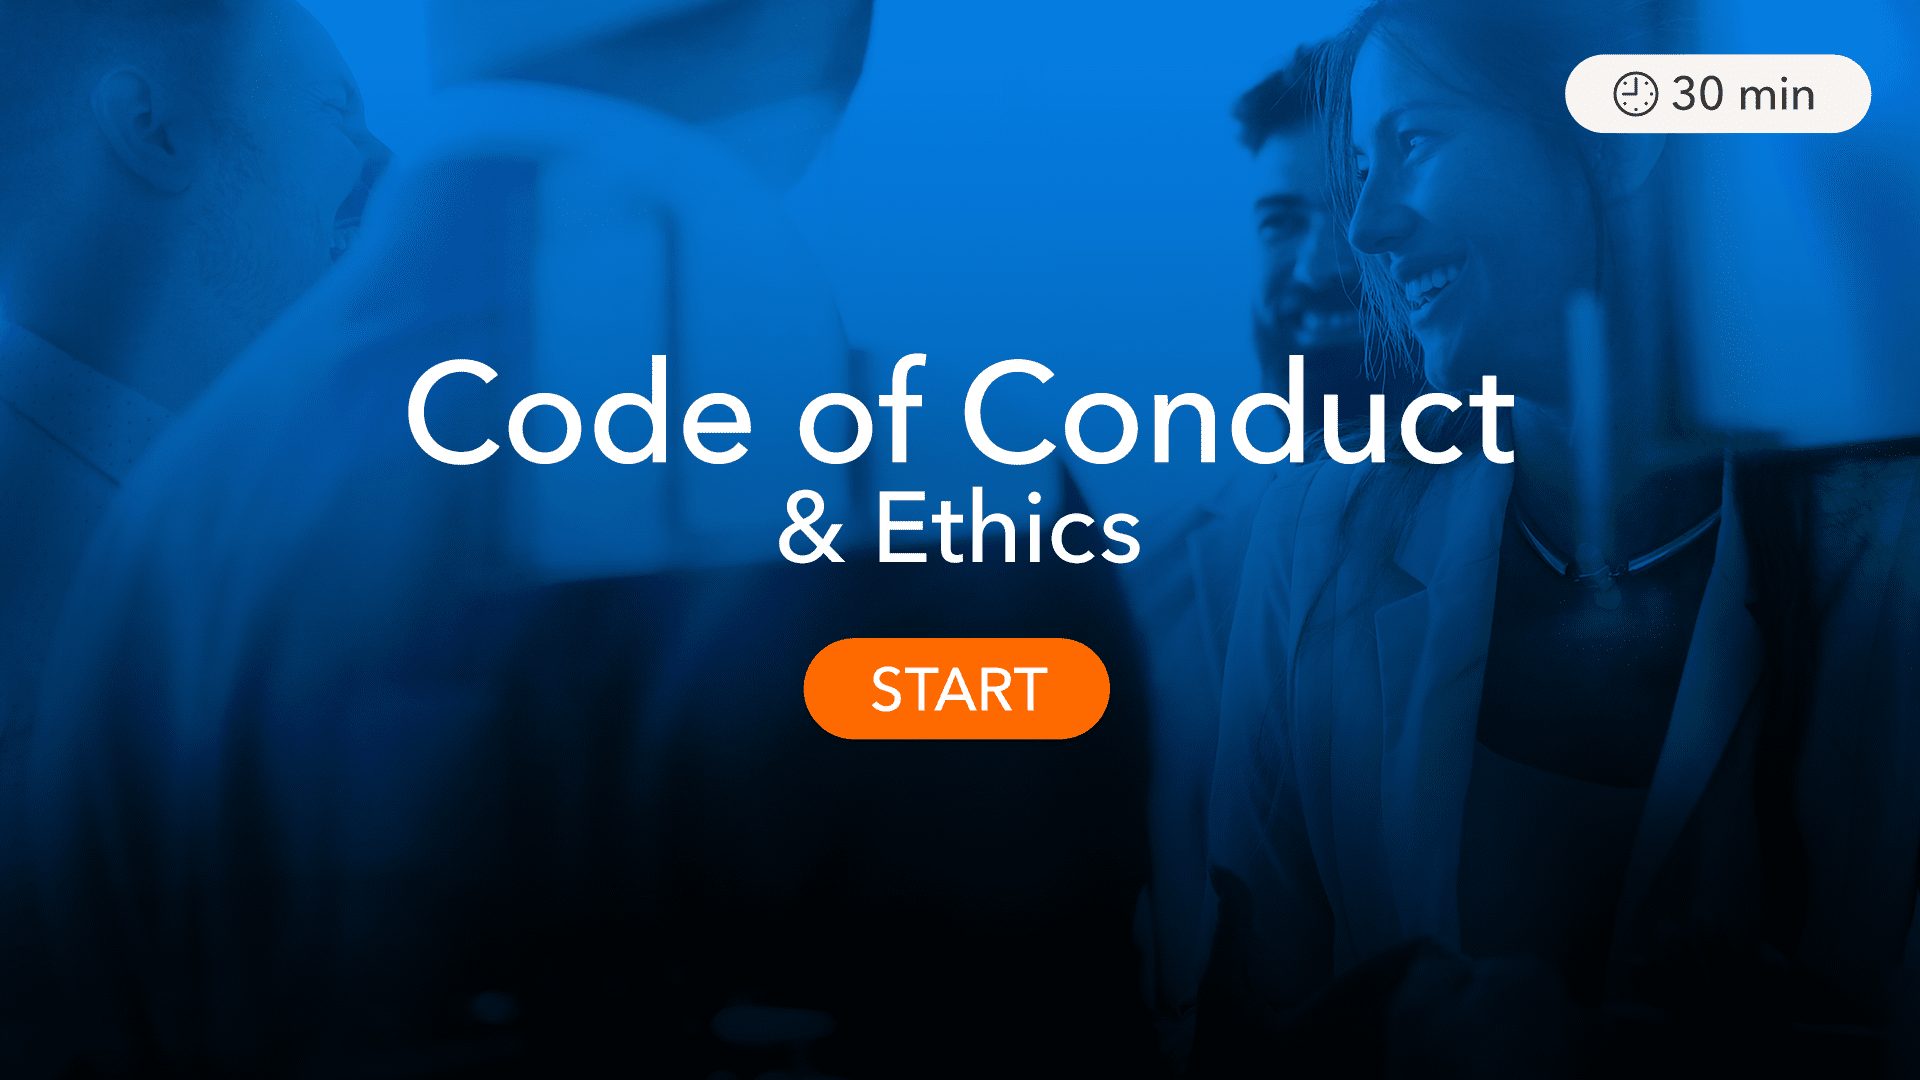 Simple Rules, Complex Application: Ethics Training that Goes Beyond Black and White